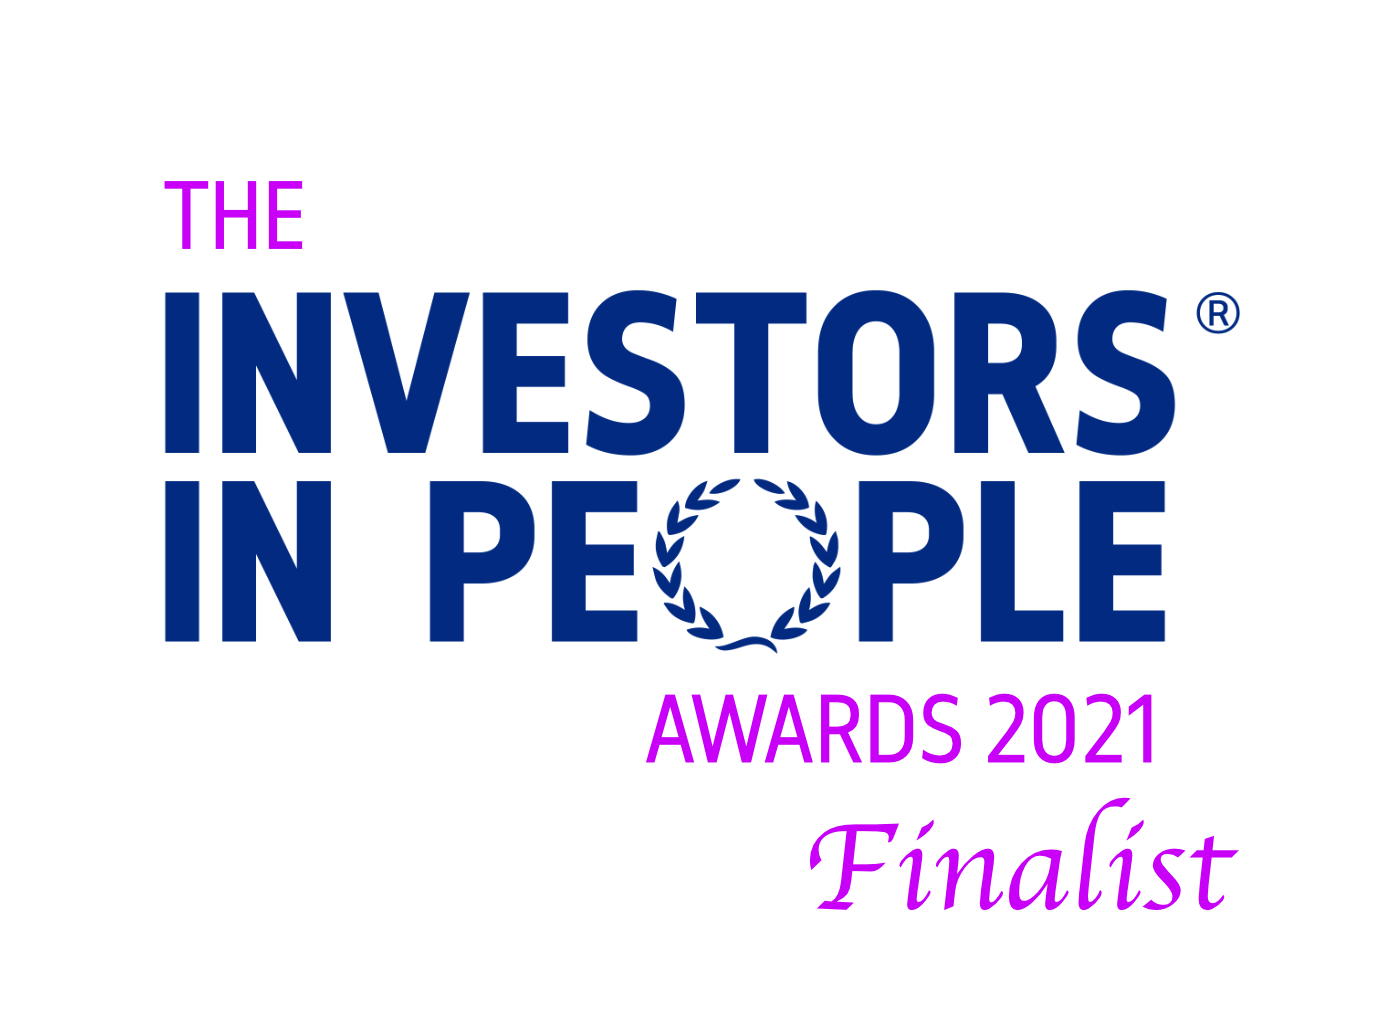 image for the Investors in People Awards award